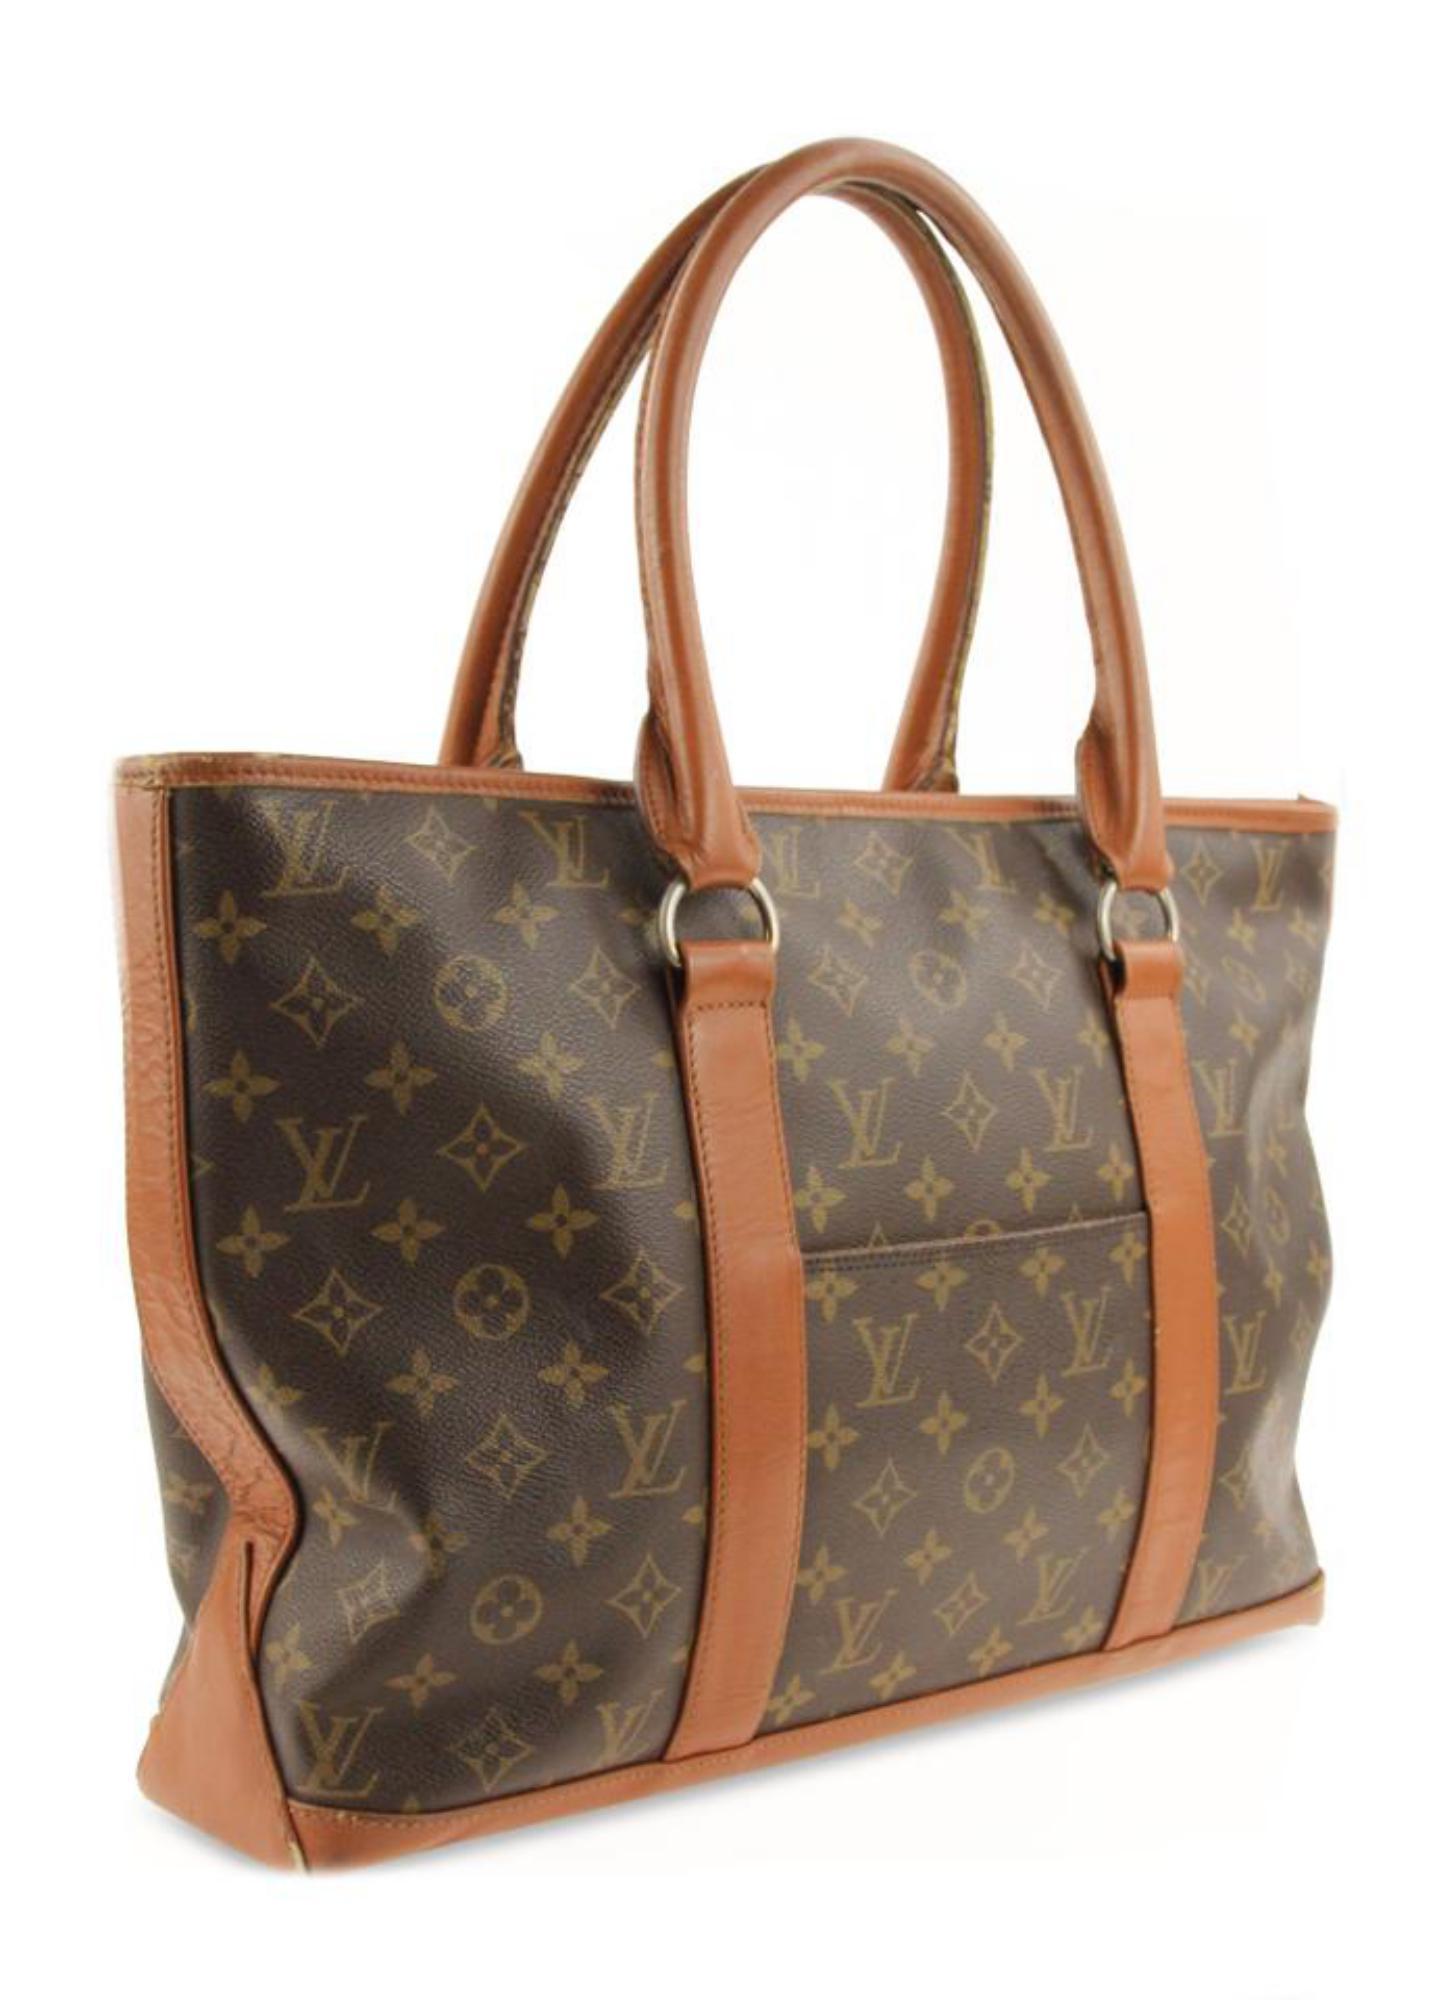 The Louis Vuitton Sac Weekend PM Tote in classic brown monogram coated canvas will quickly become your go-to bag, ready to accompany you on a quick trip or over your shoulder as you transport your laptop to work.
Brown leather trim
Approximate